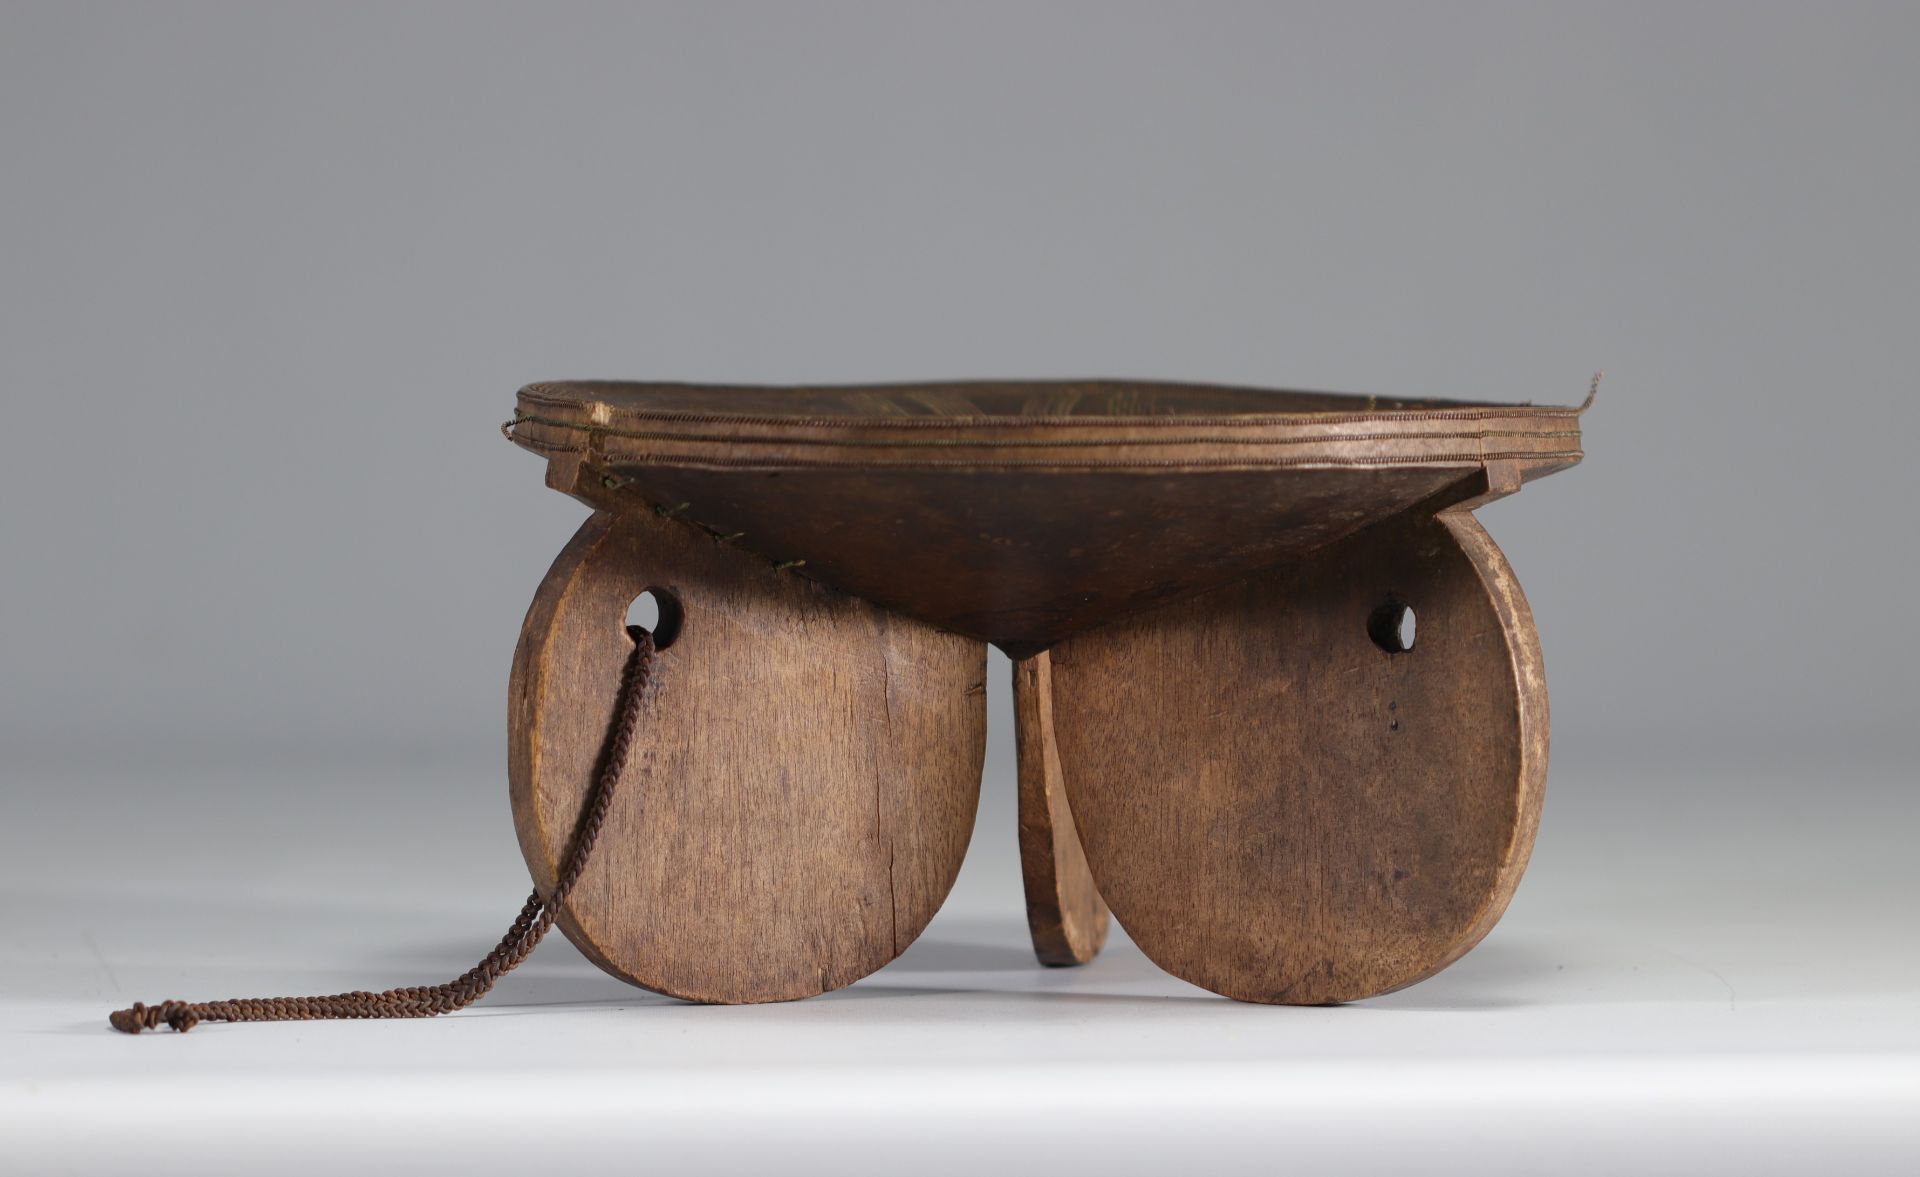 Beautiful and rare Kamba stool inlaid with copper wire from Kenya (damaged)